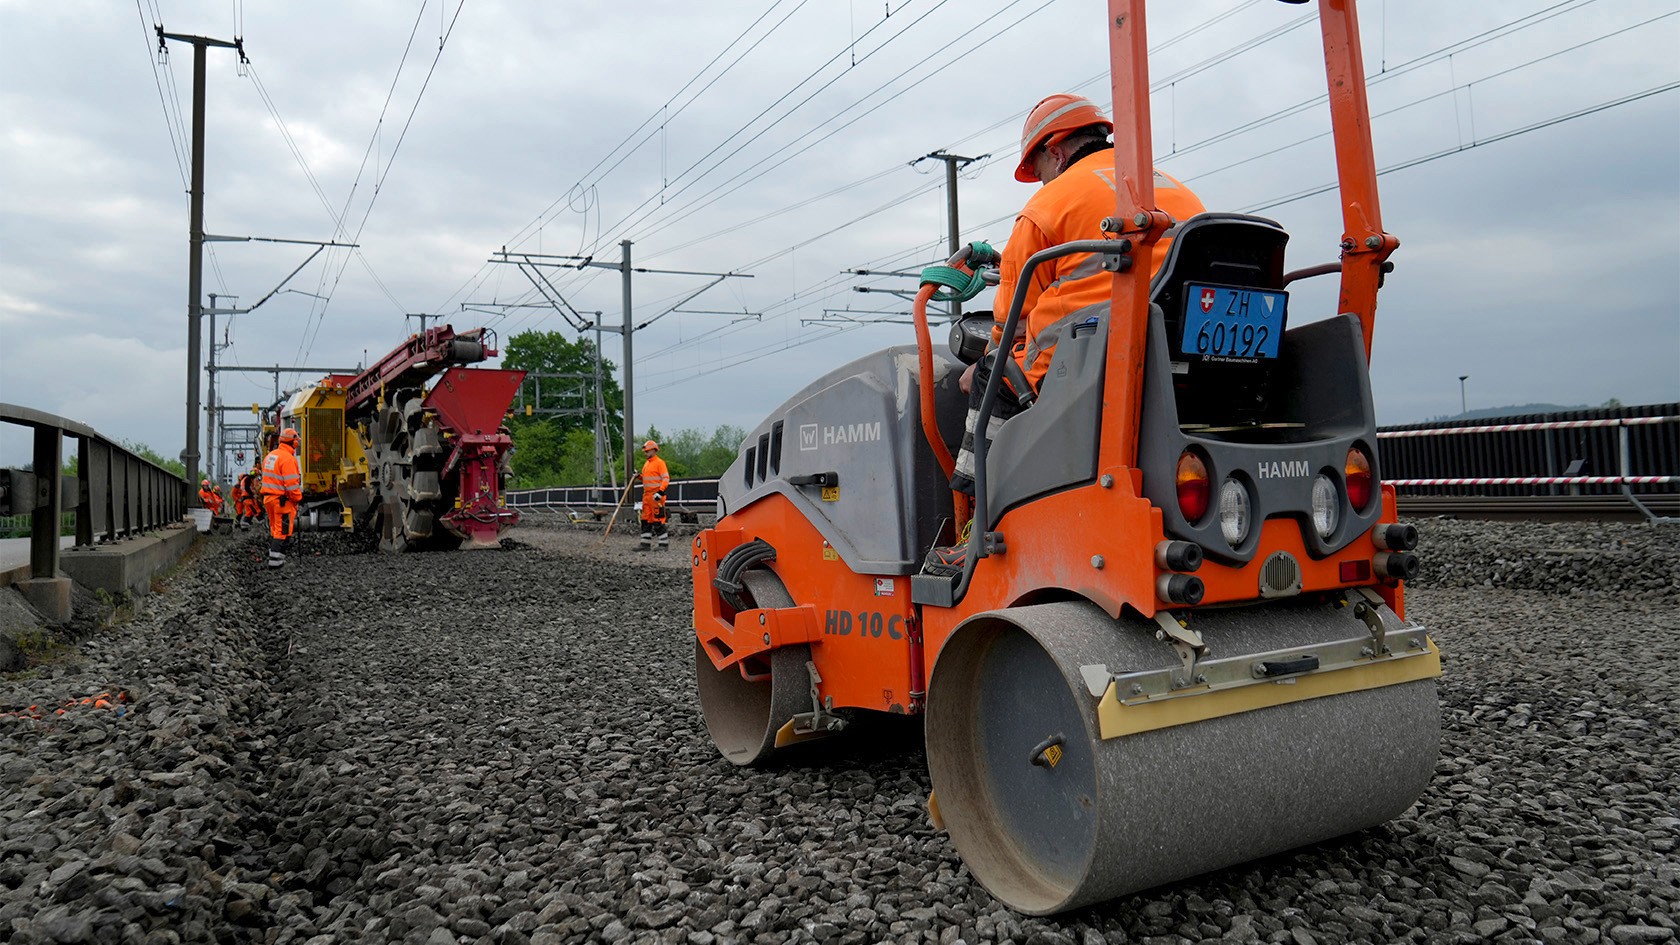 Compacting ballast on the railway with the HD 10C VV